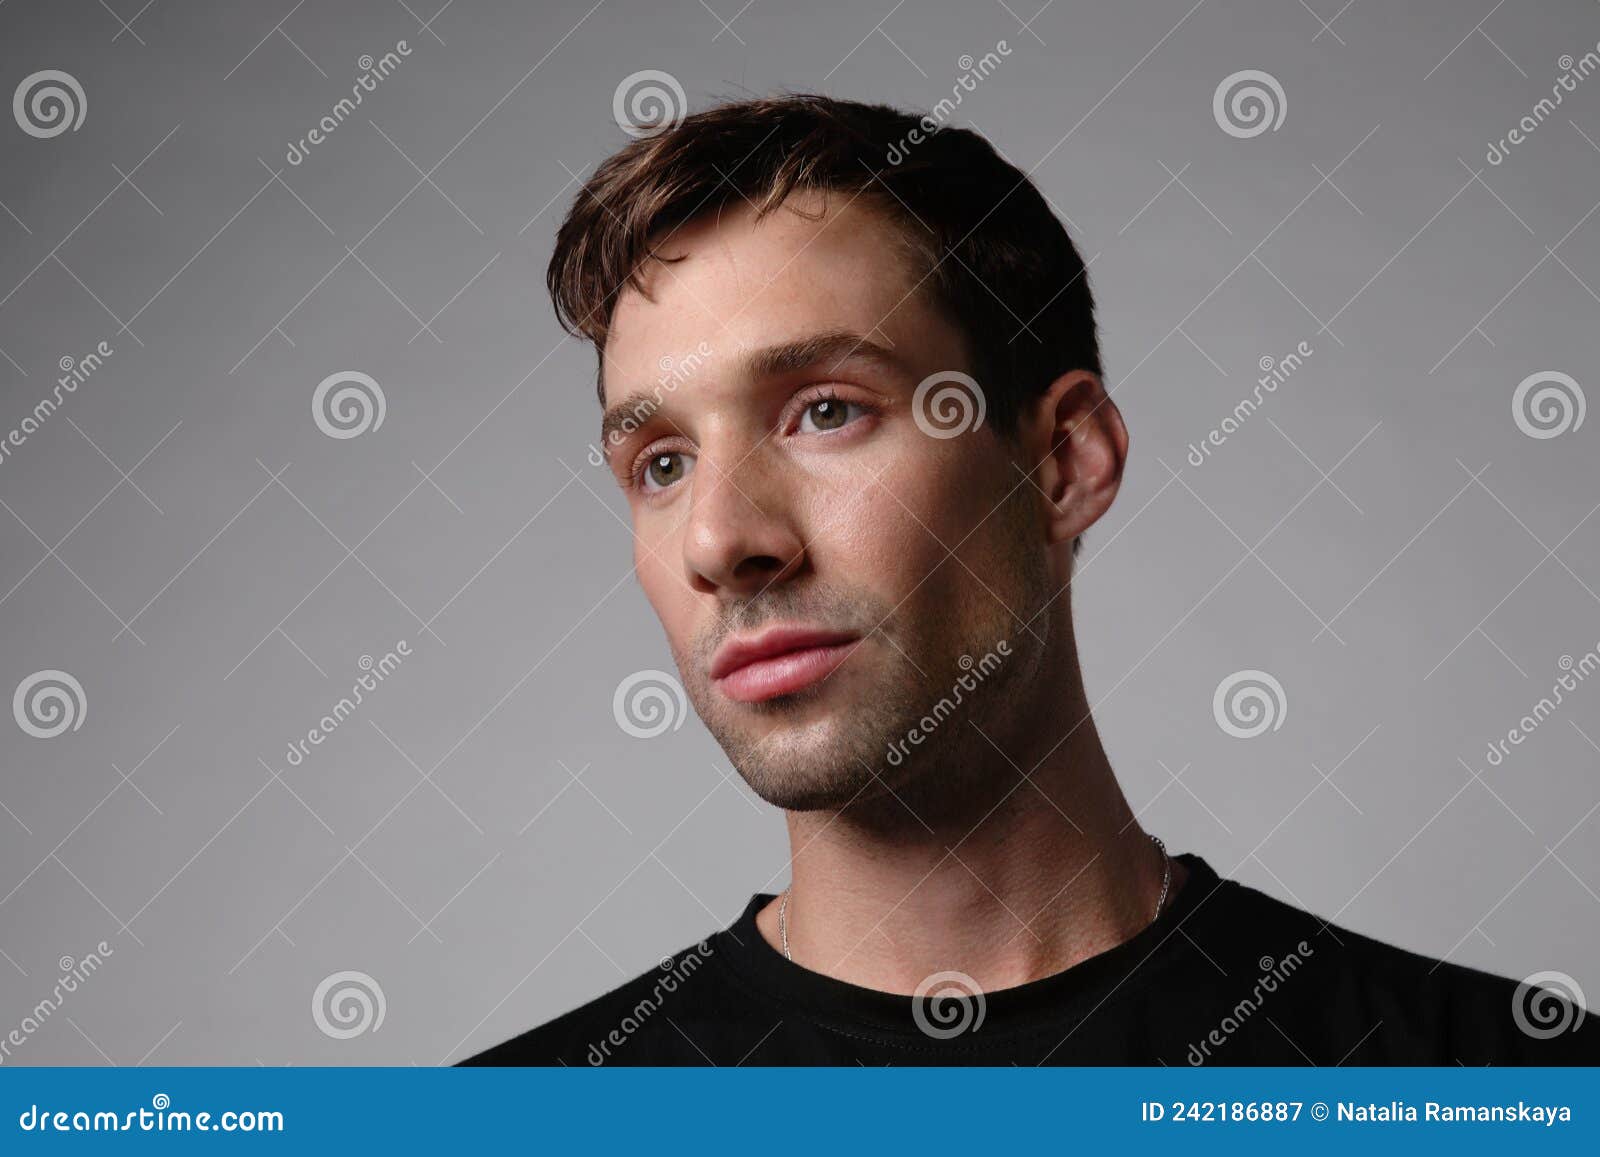 portrait of young handsome man with serious face expression. white background.